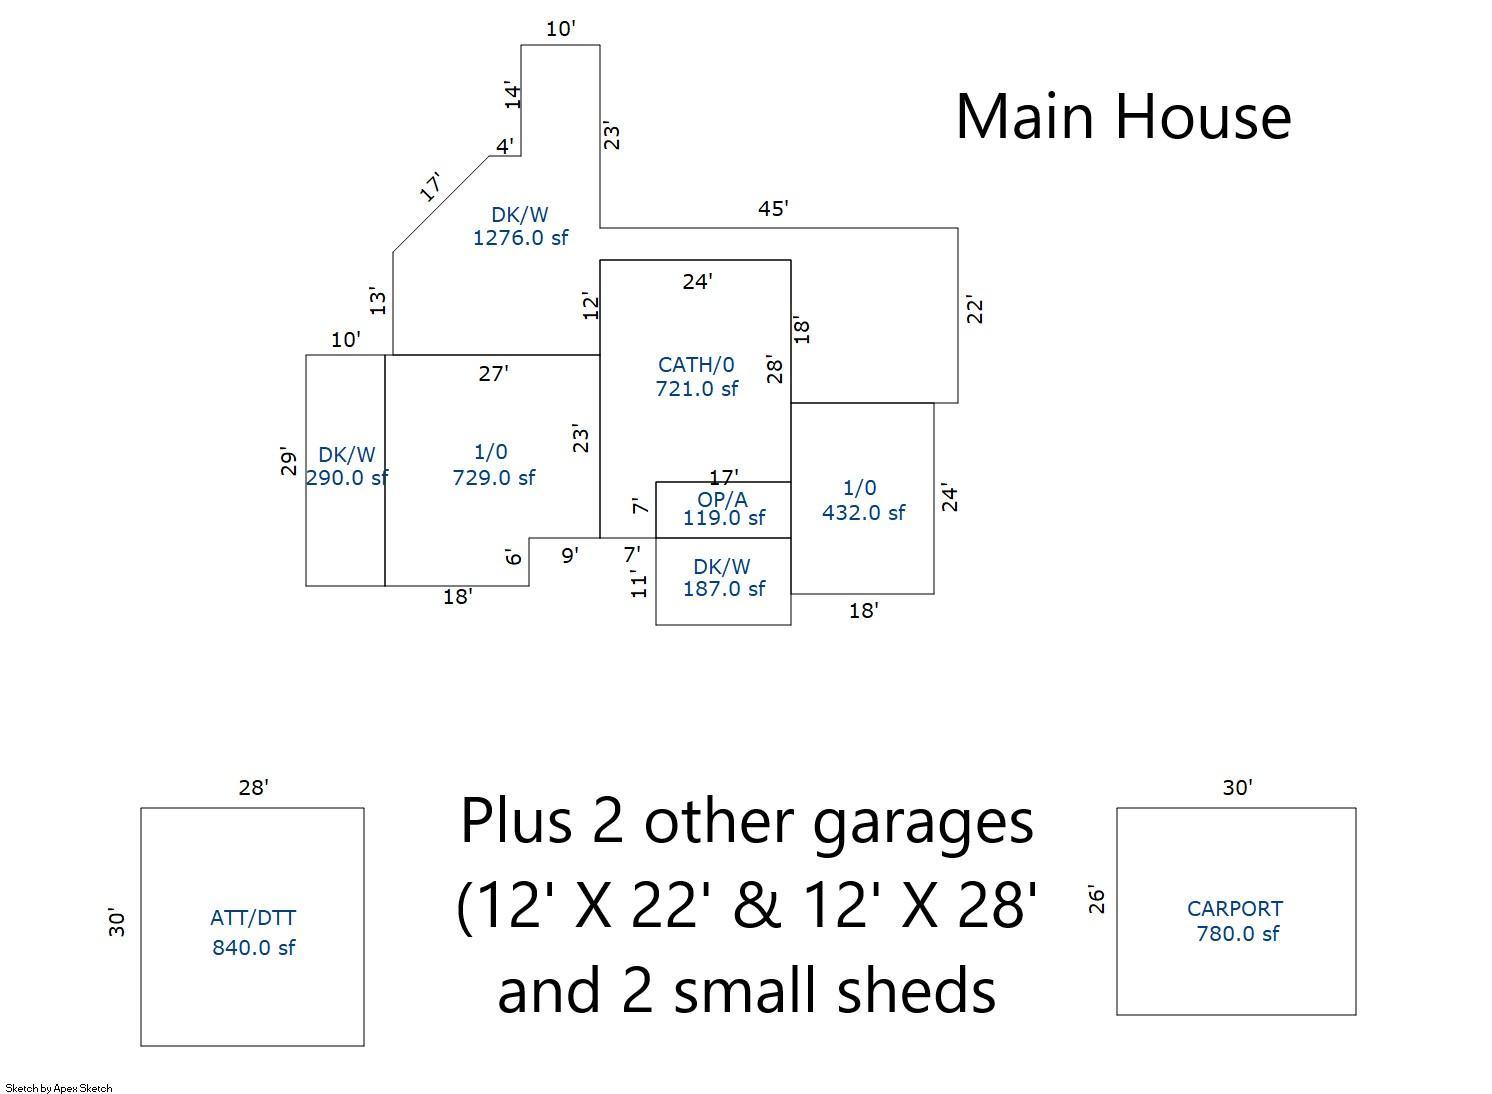 Birch Acres Main House Dimensions from County.jpg